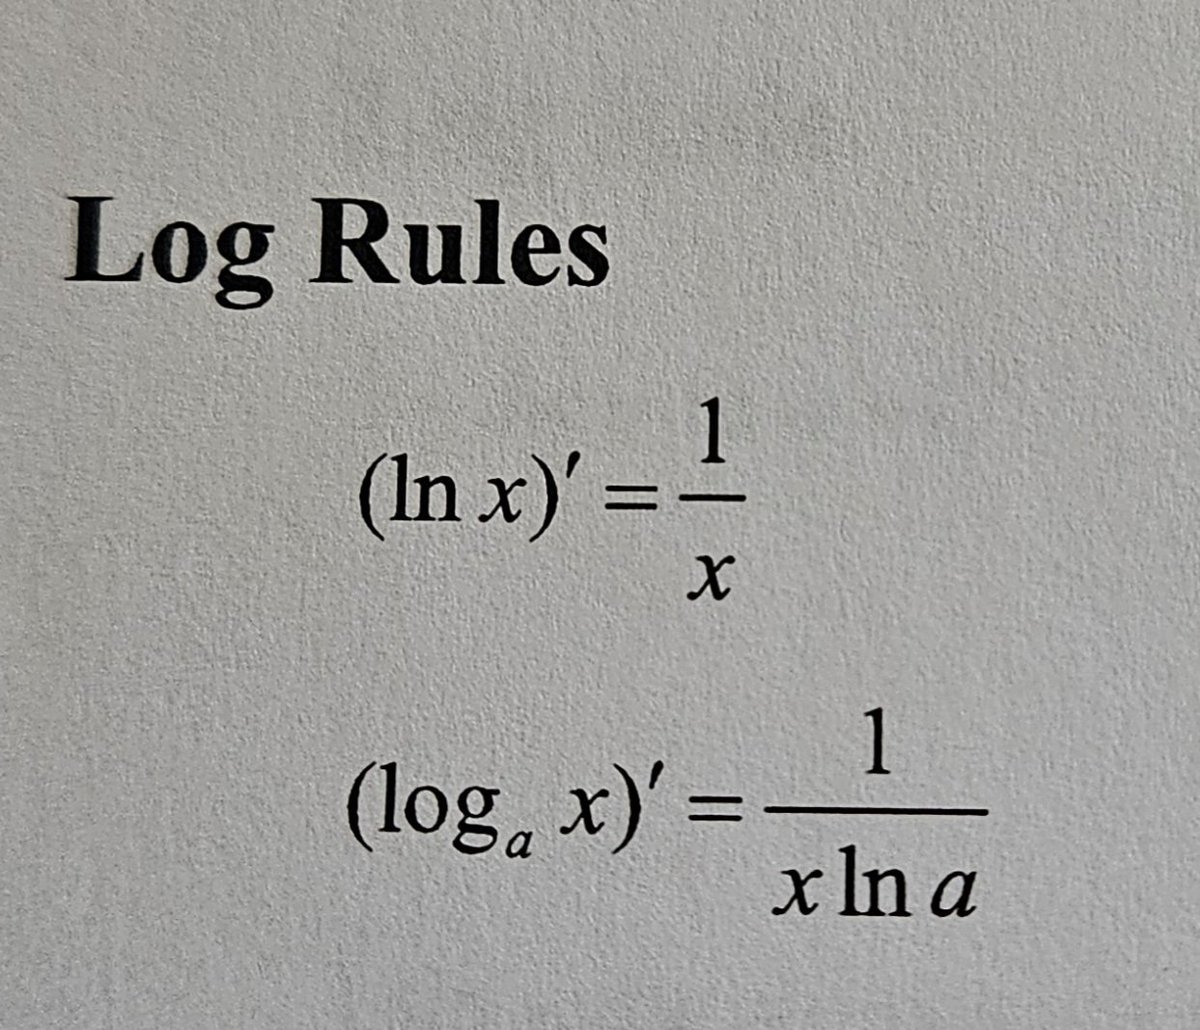 I am reviewing calculus 1, and I don't remember learning the second log rule. How does e just manifest?

... should I just accept it and move on? I'm really rusty and have a lot to cover.

#math #mathematician